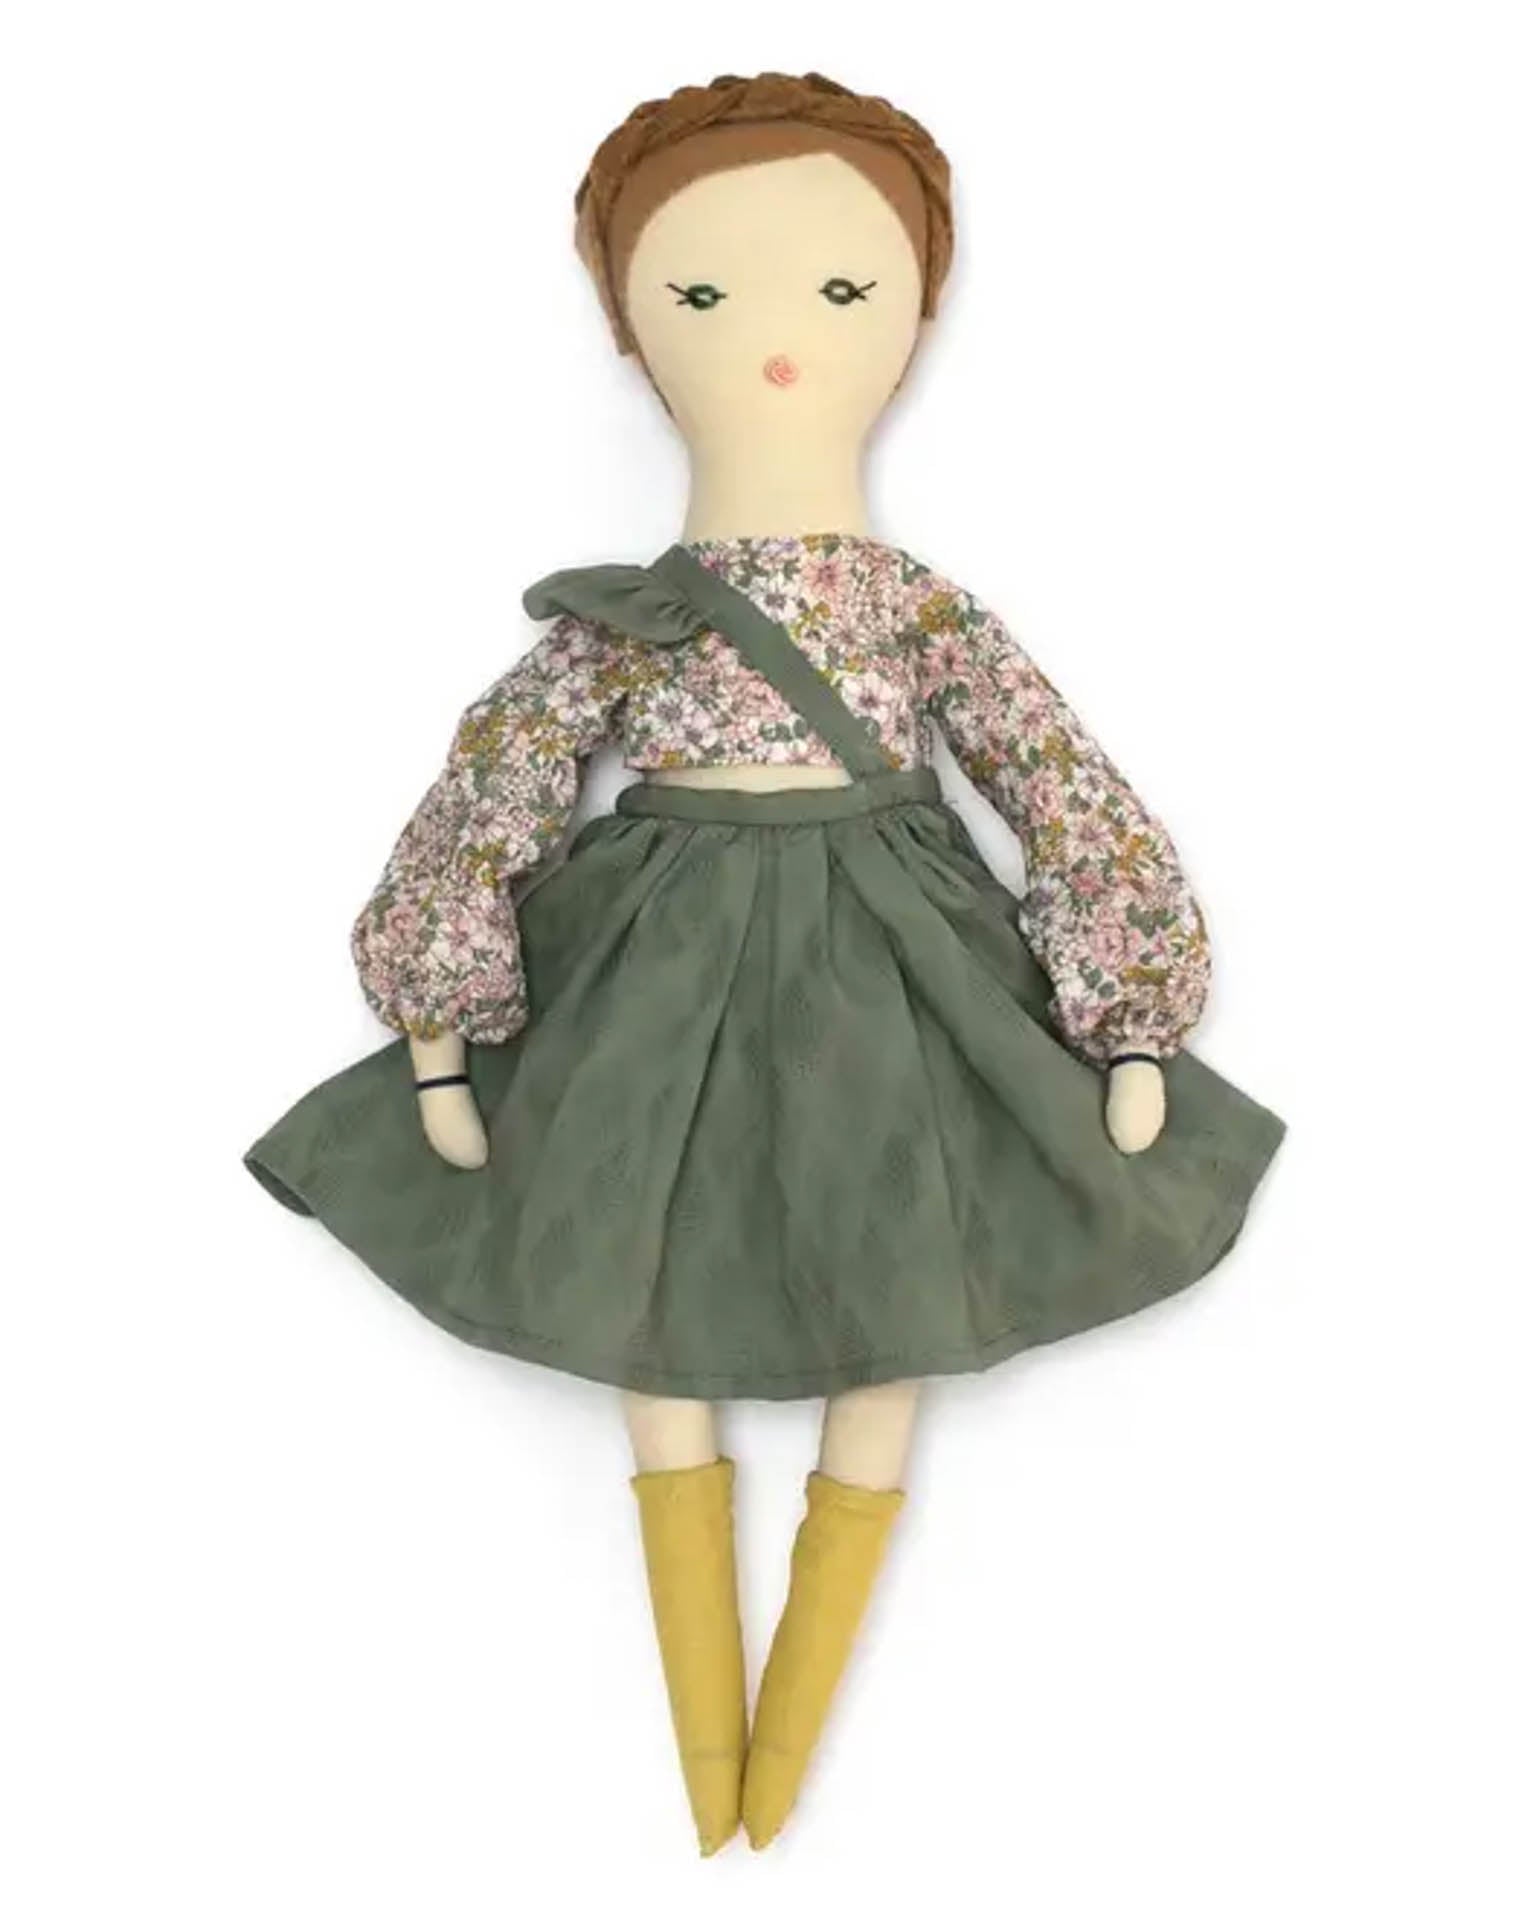 Little dumyé play maple adventure doll with ivory body, copper hair + olive eyes